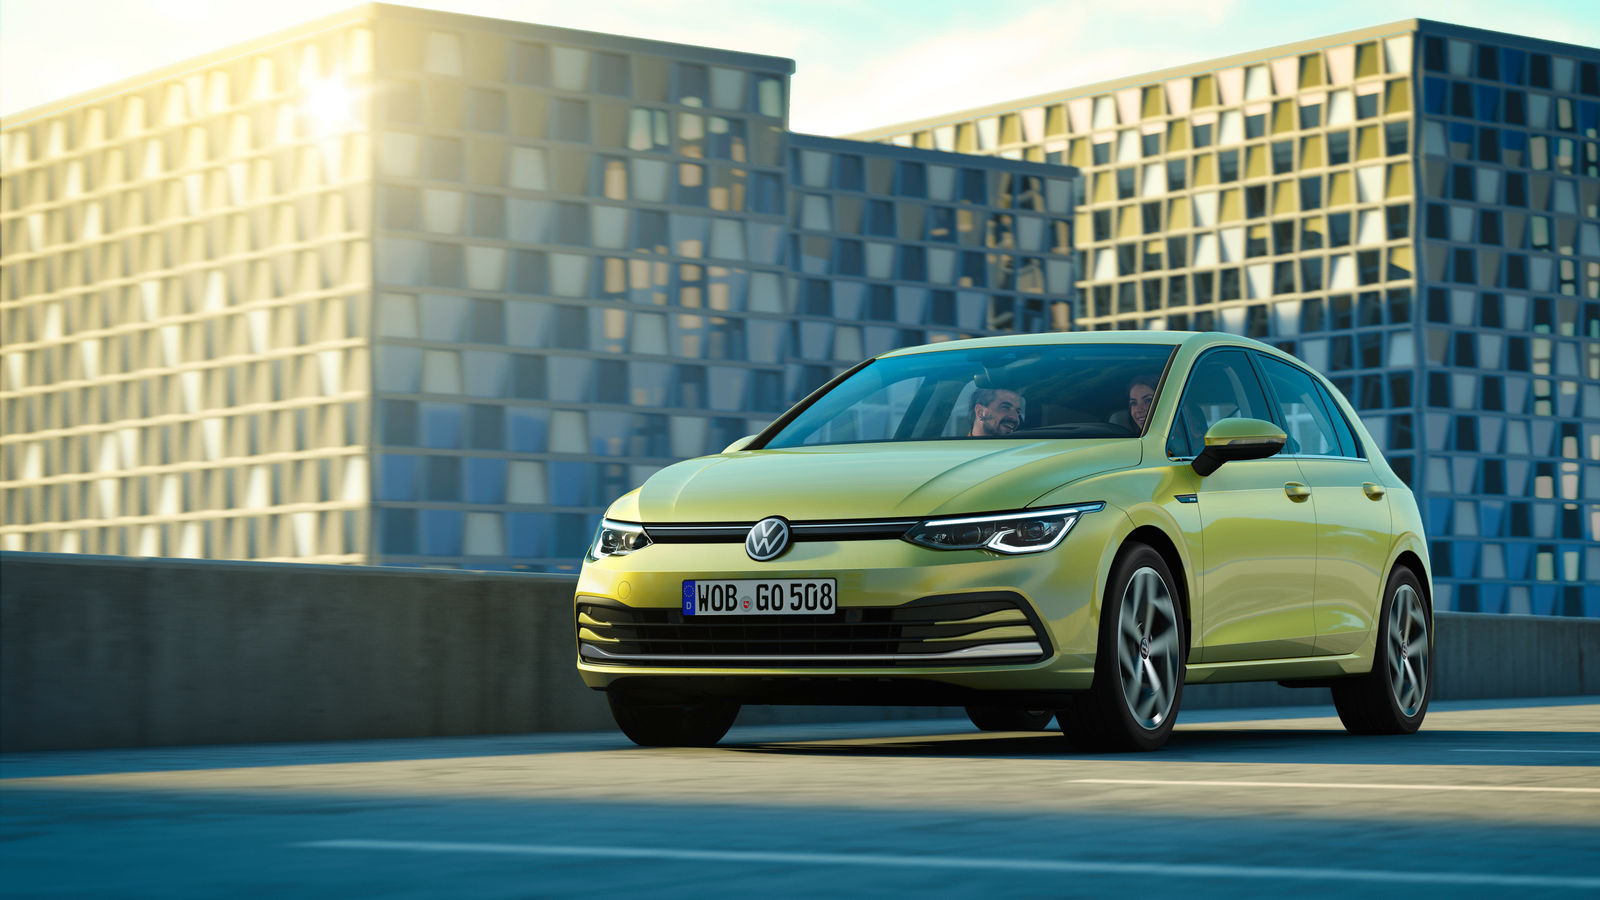 World premiere for the new Golf: digitalised, connected, and